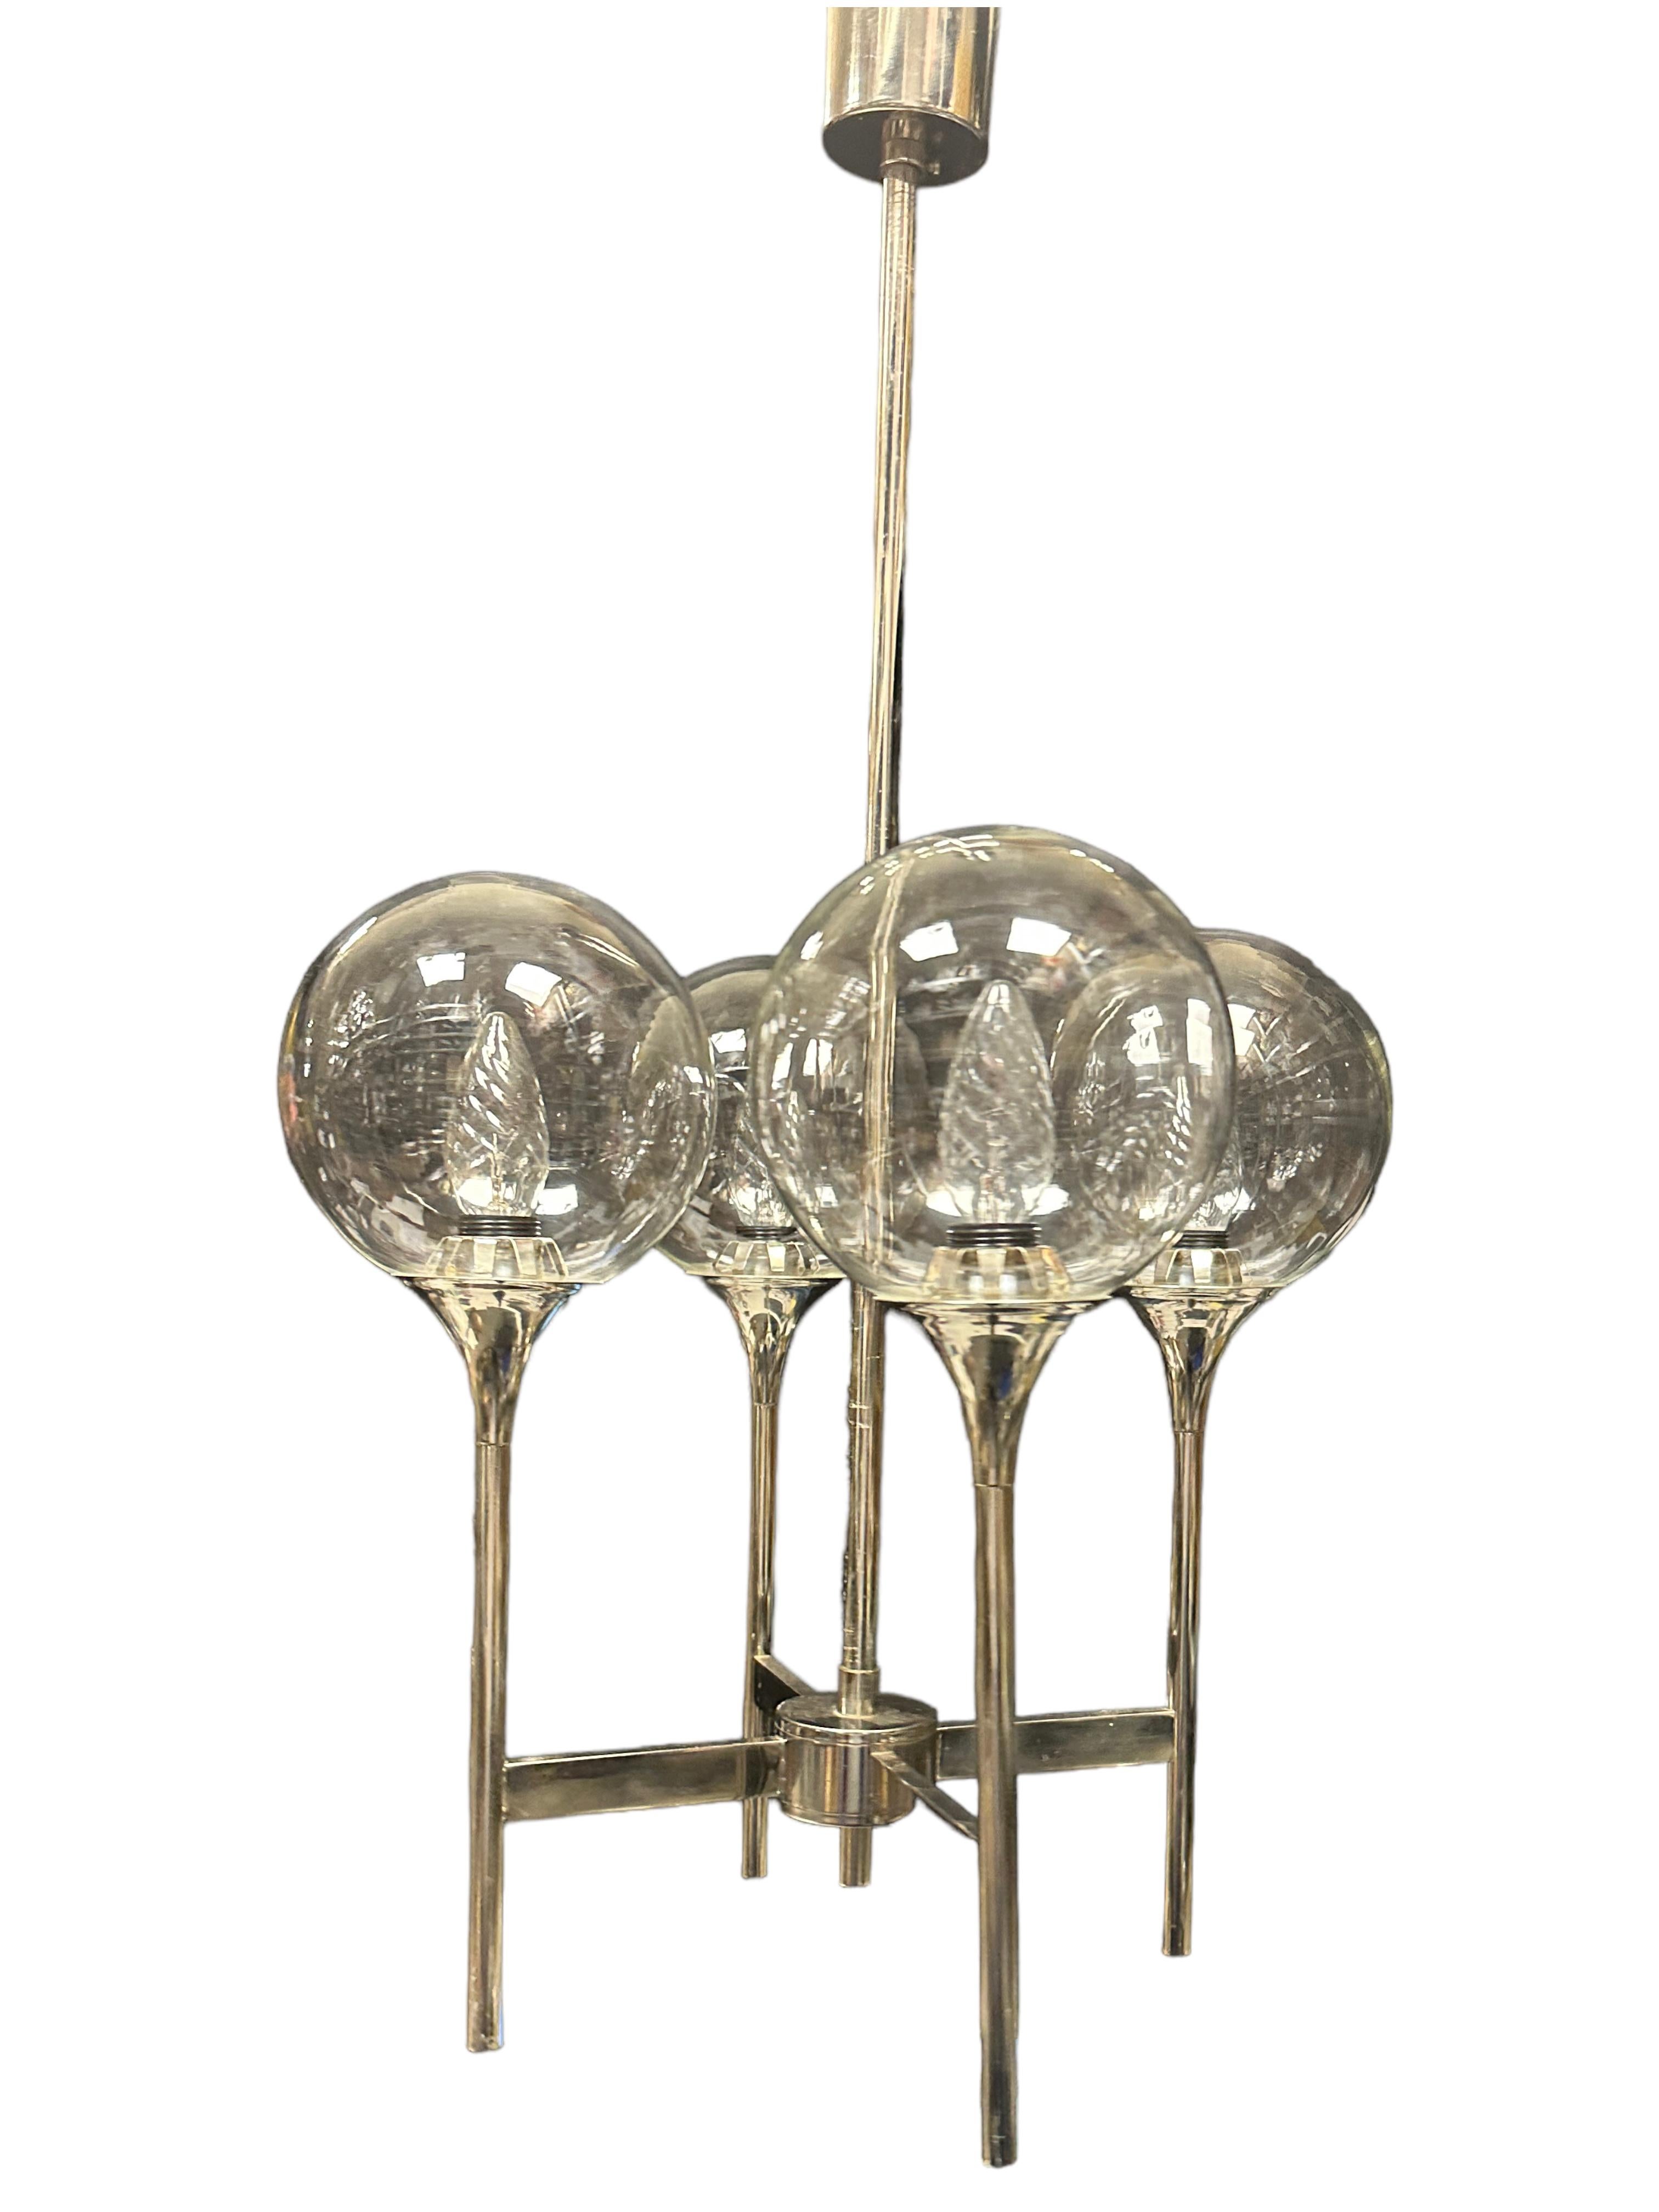 Pair of Reggiani Sciolari Style 1970S 4 Light, Chrome and Glass Ball Chandelier For Sale 4